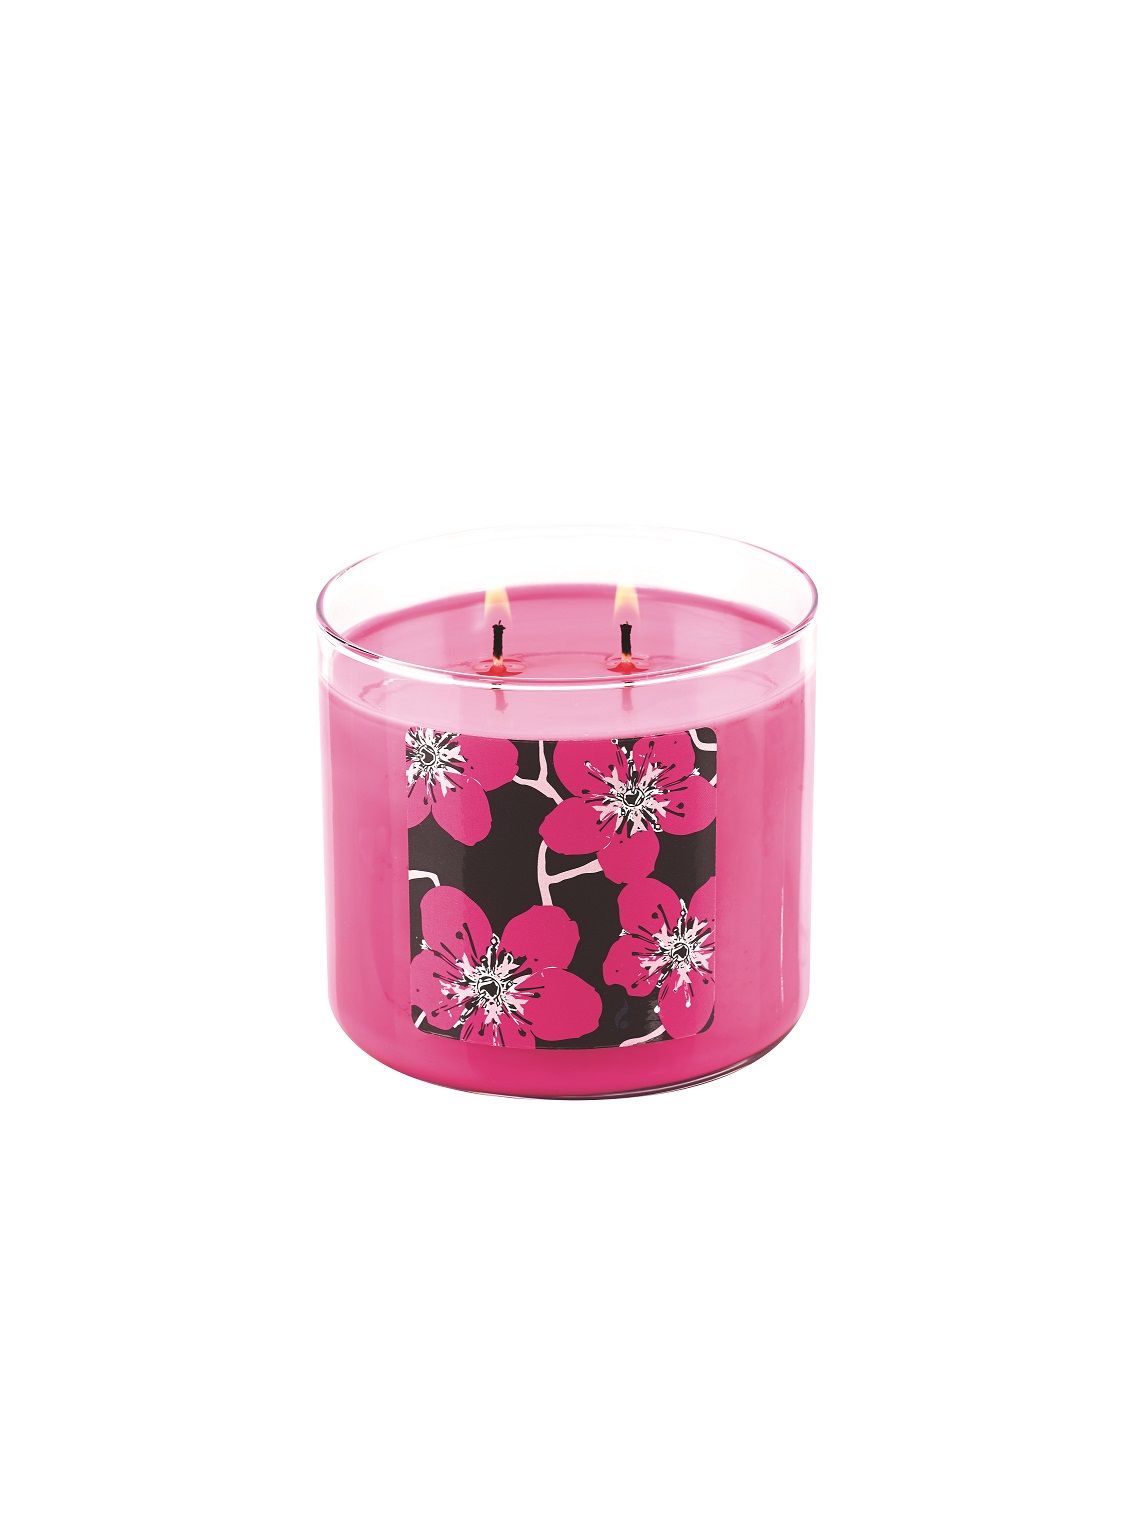 Gold Canyon Candle for Cures in Pink Sugar Cookie benefits the Breast Cancer Research Foundation